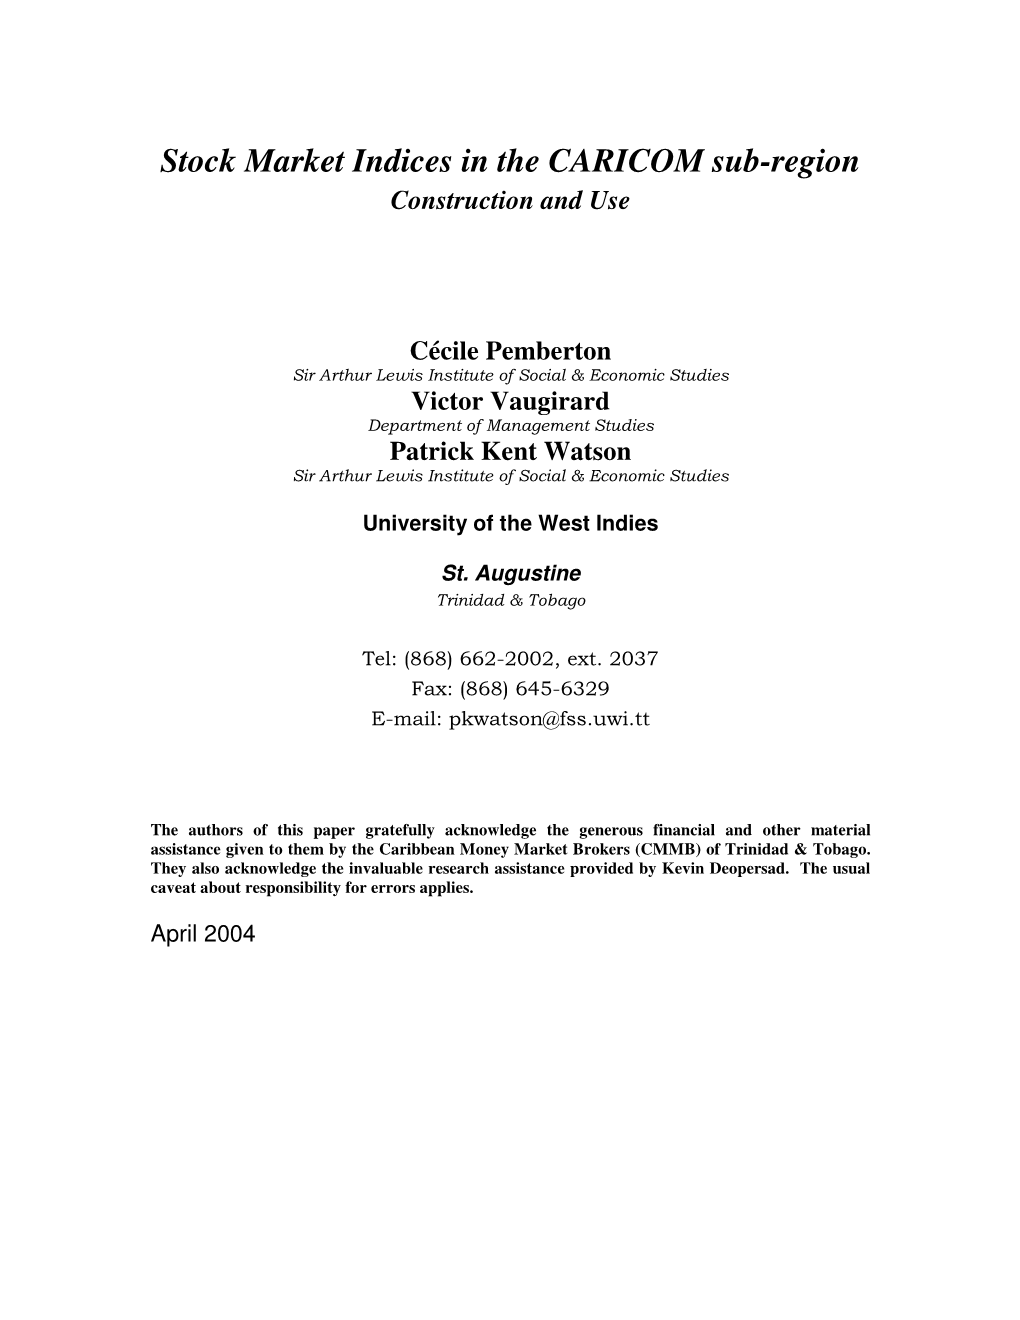 Stock Market Indices in the CARICOM Sub-Region Construction and Use